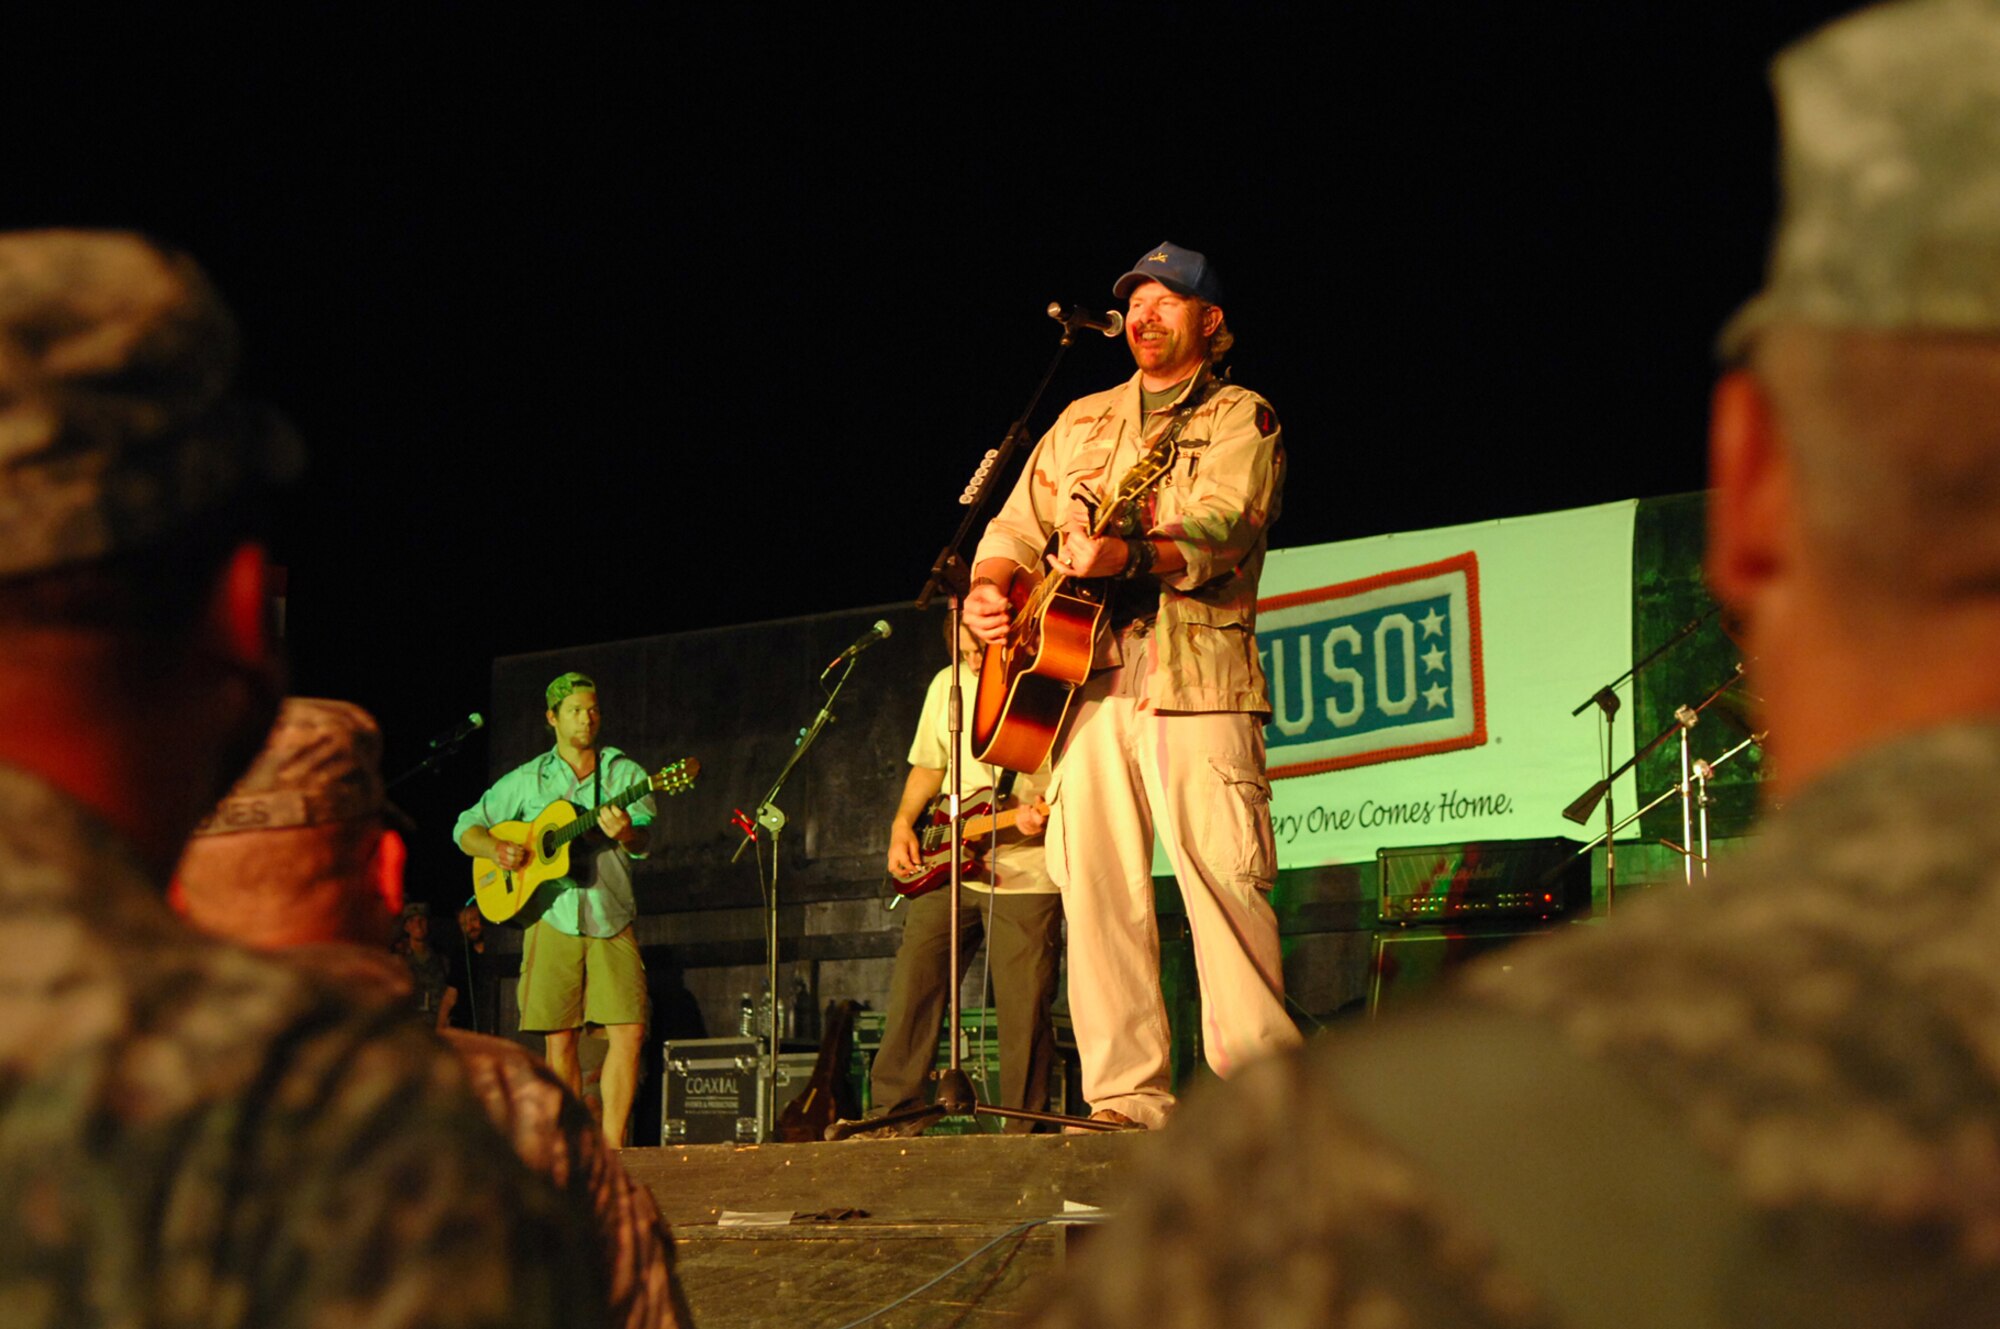 BALAD AIR BASE, Iraq -- Country music superstar Toby Keith sings to a crowd of more than 5,000 servicemembers here, April 28. Mr. Keith told those in attendance that he was proud of their service and thankful for their efforts in fighting terrorists and keeping America free. He referred to military members as "warriors" and was present for the re-enlistments of five Soldiers stationed at Logistics Support Agency Anaconda, which is co-located with Balad. Mr. Keith is wrapping up his sixth USO tour in Iraq; his show at Balad marked his 117th show in the Area of Responsibility. (U.S. Air Force photo/ Senior Airman Julianne Showalter)